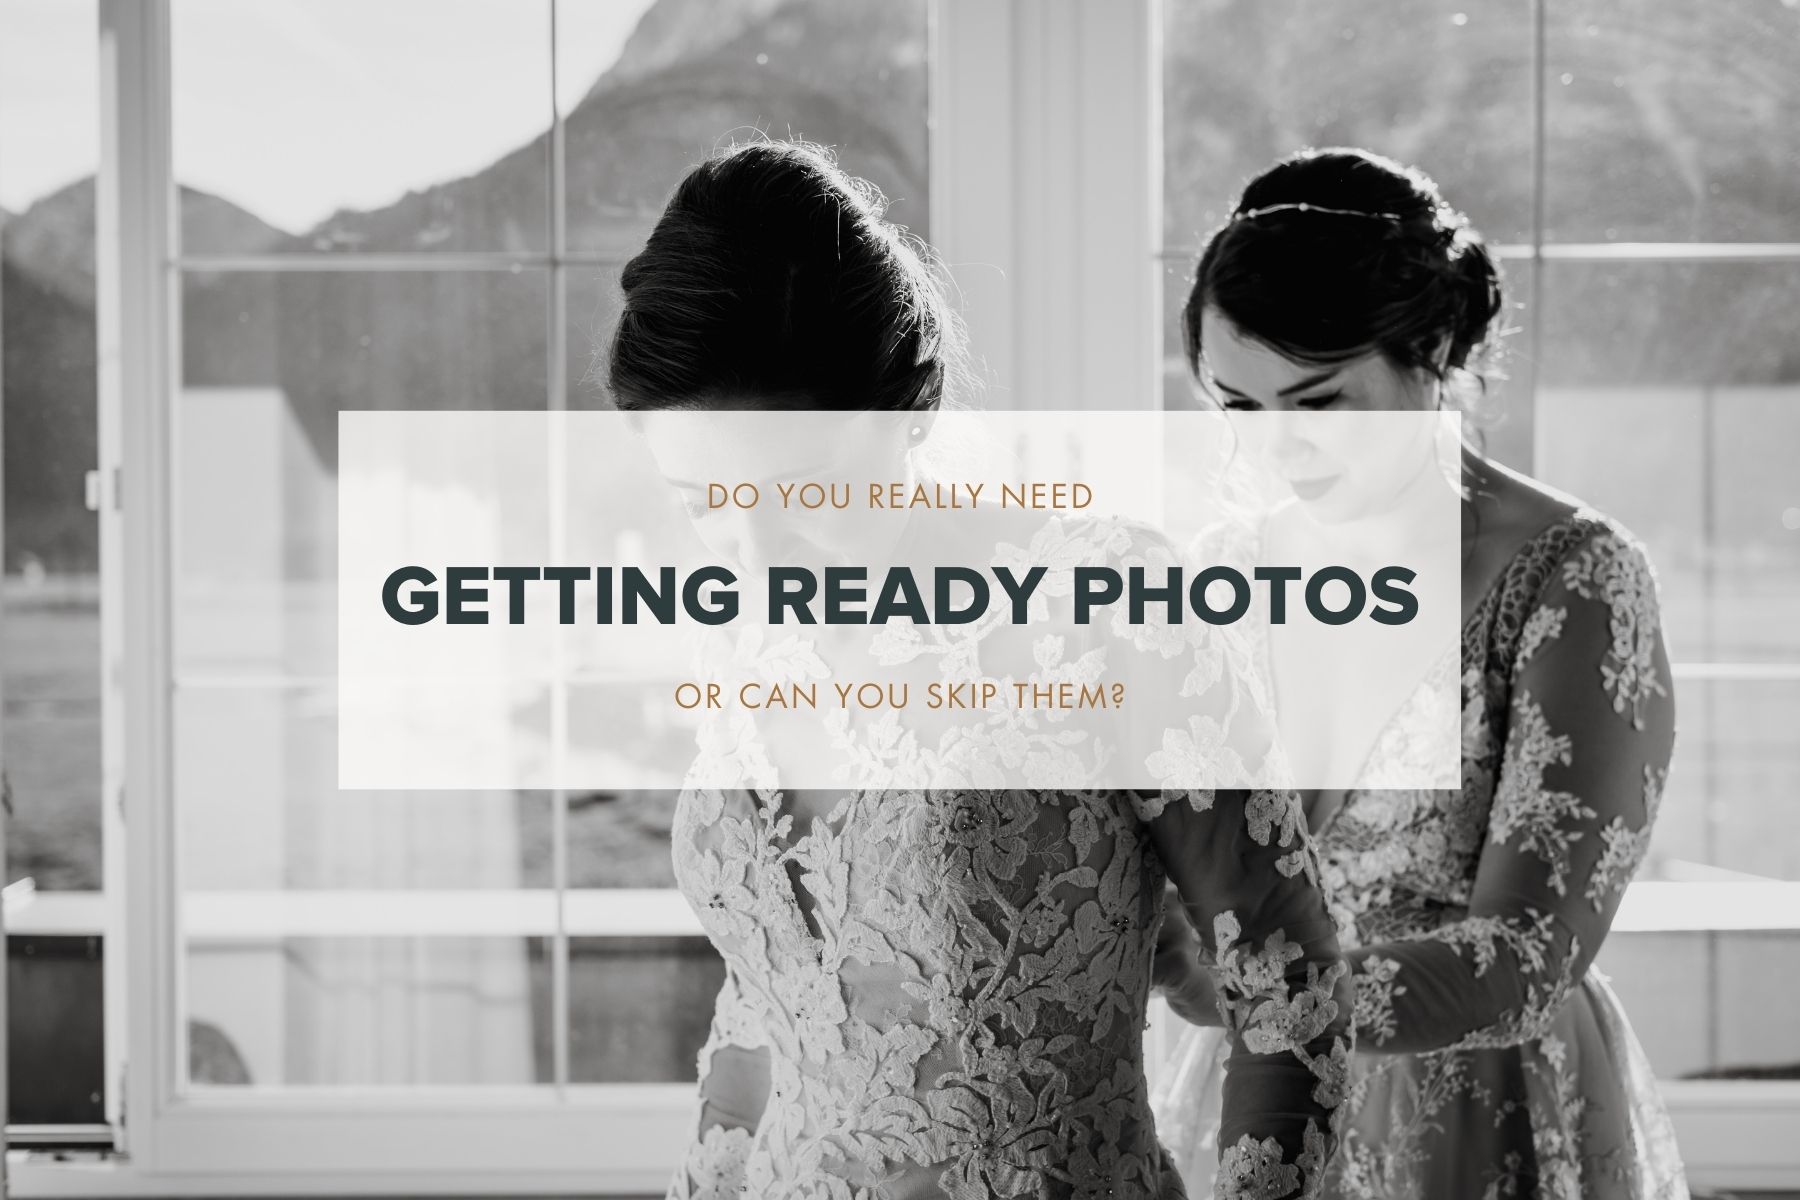 Do We Need Getting Ready Photos?